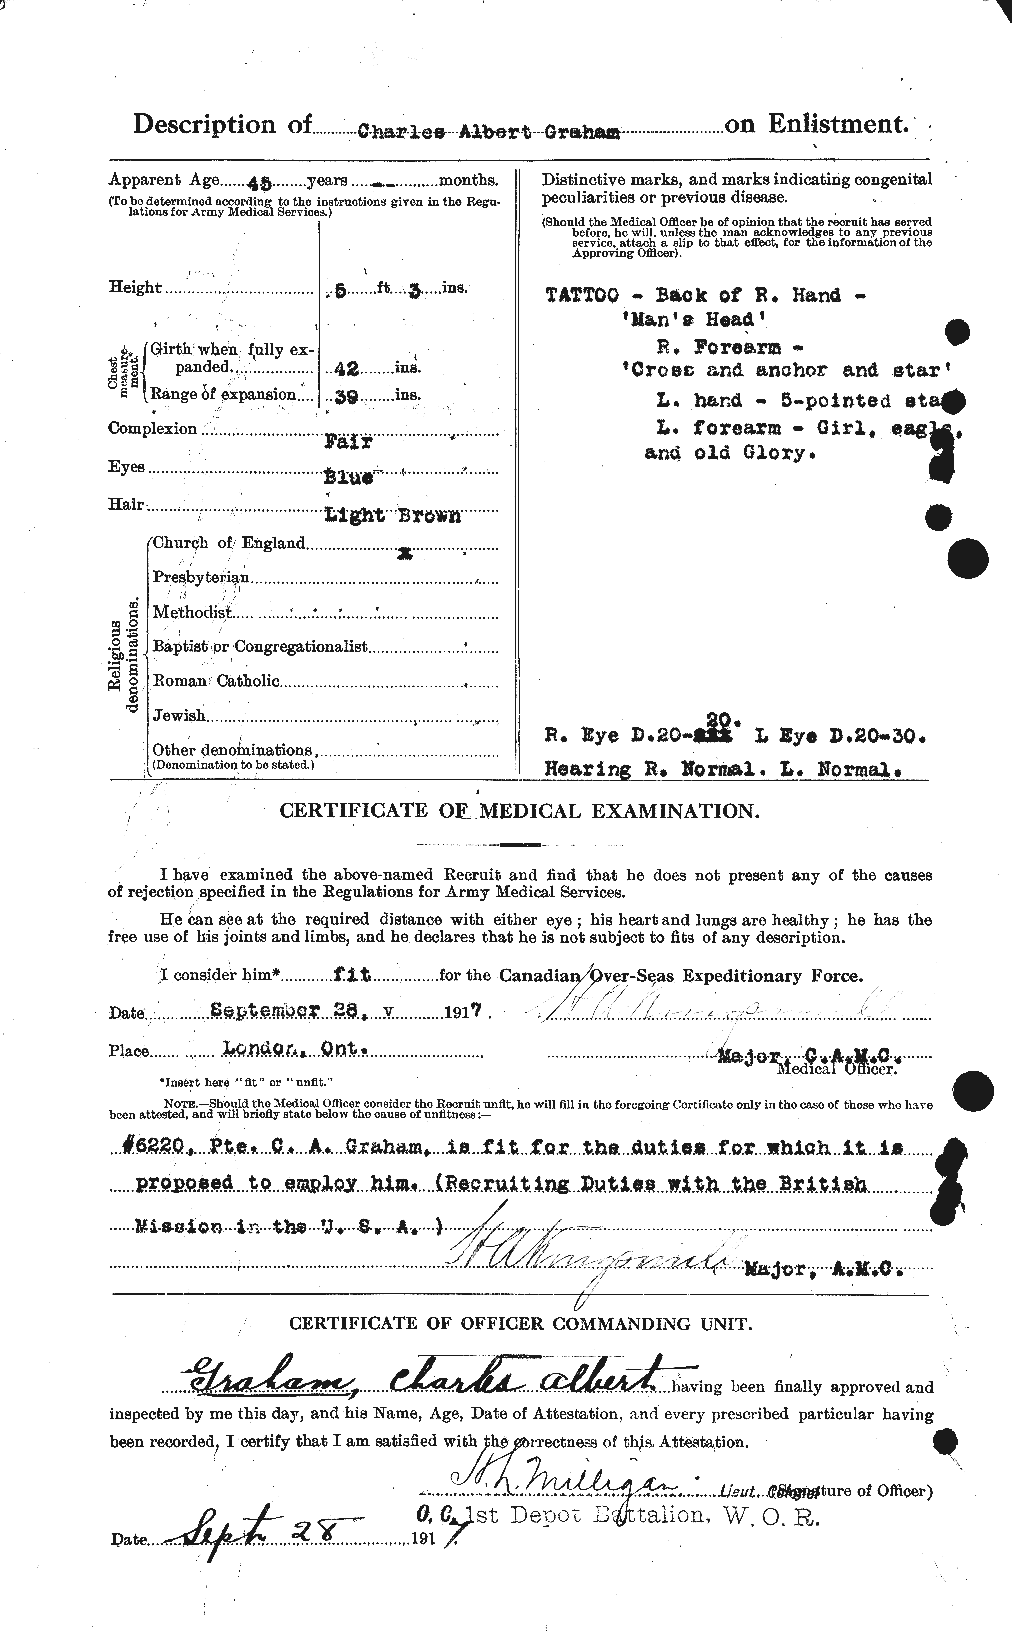 Personnel Records of the First World War - CEF 359703b